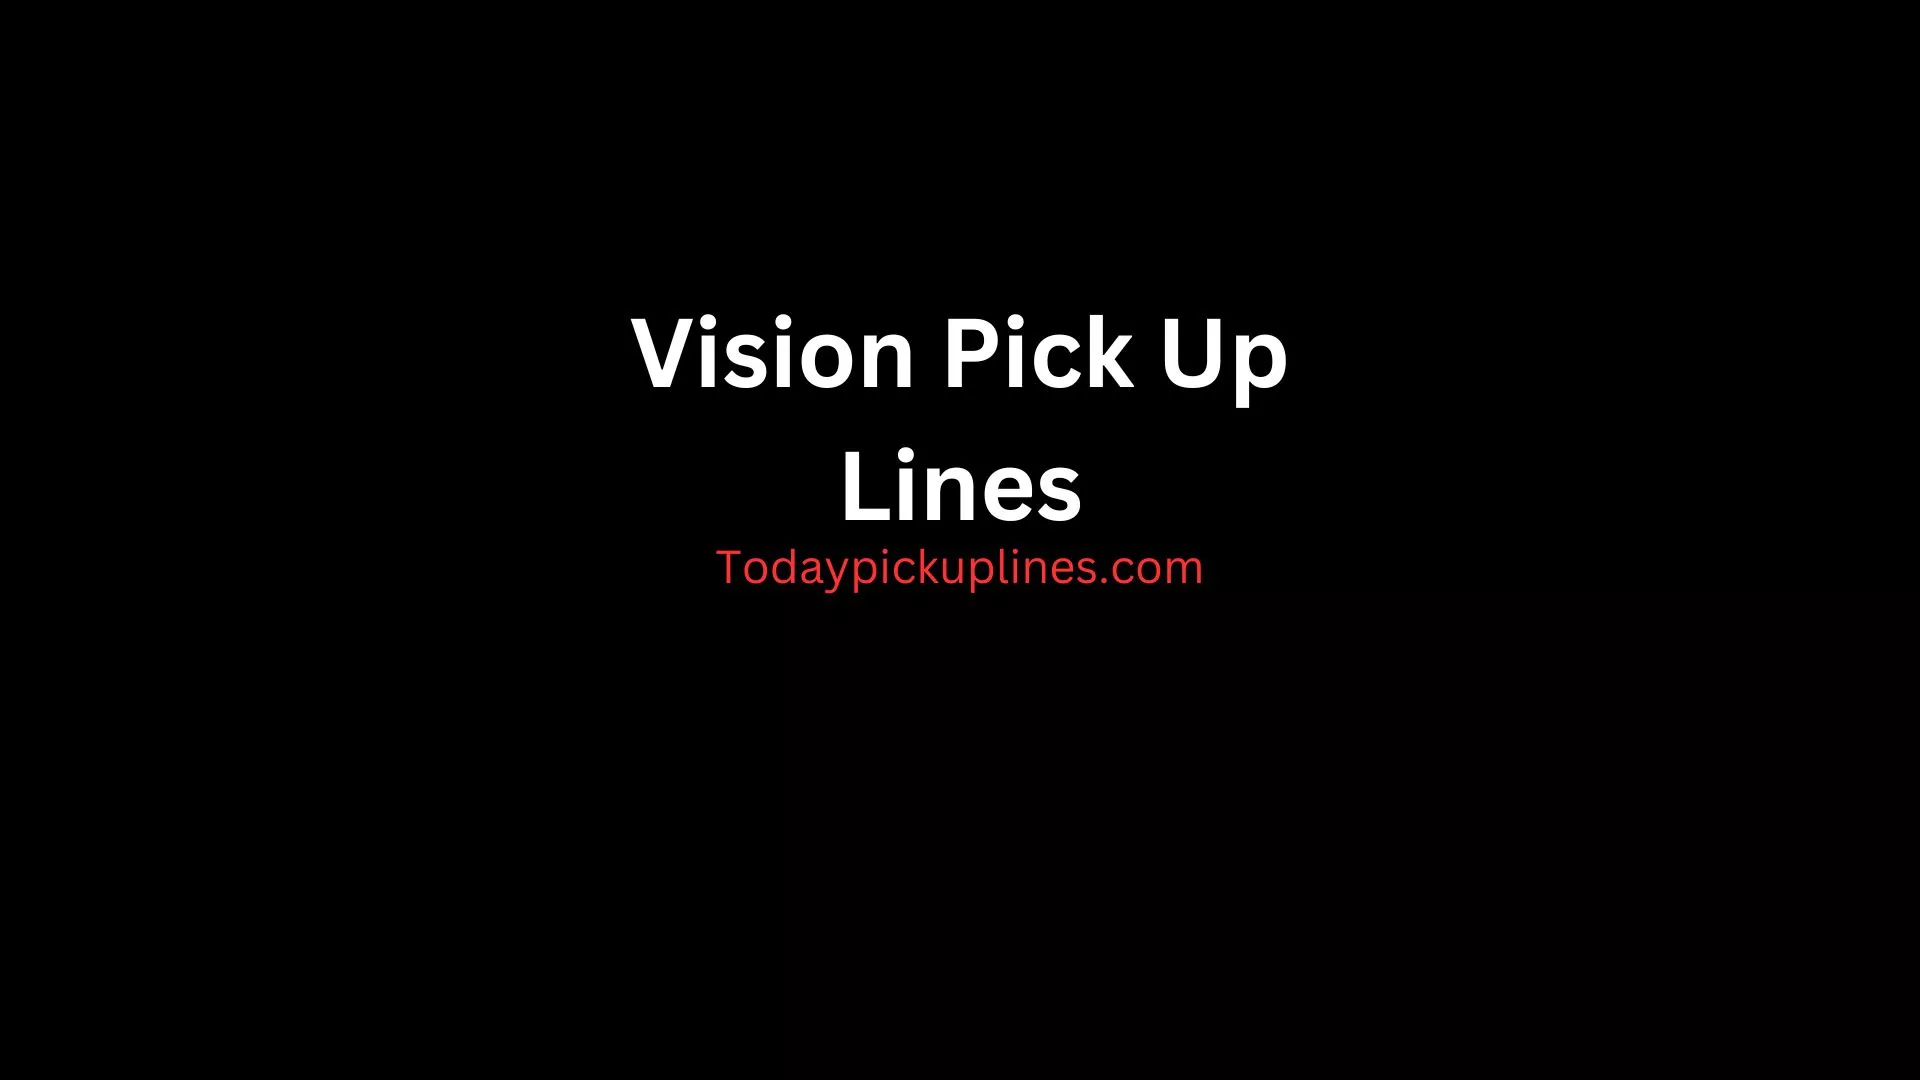 Vision Pick Up Lines